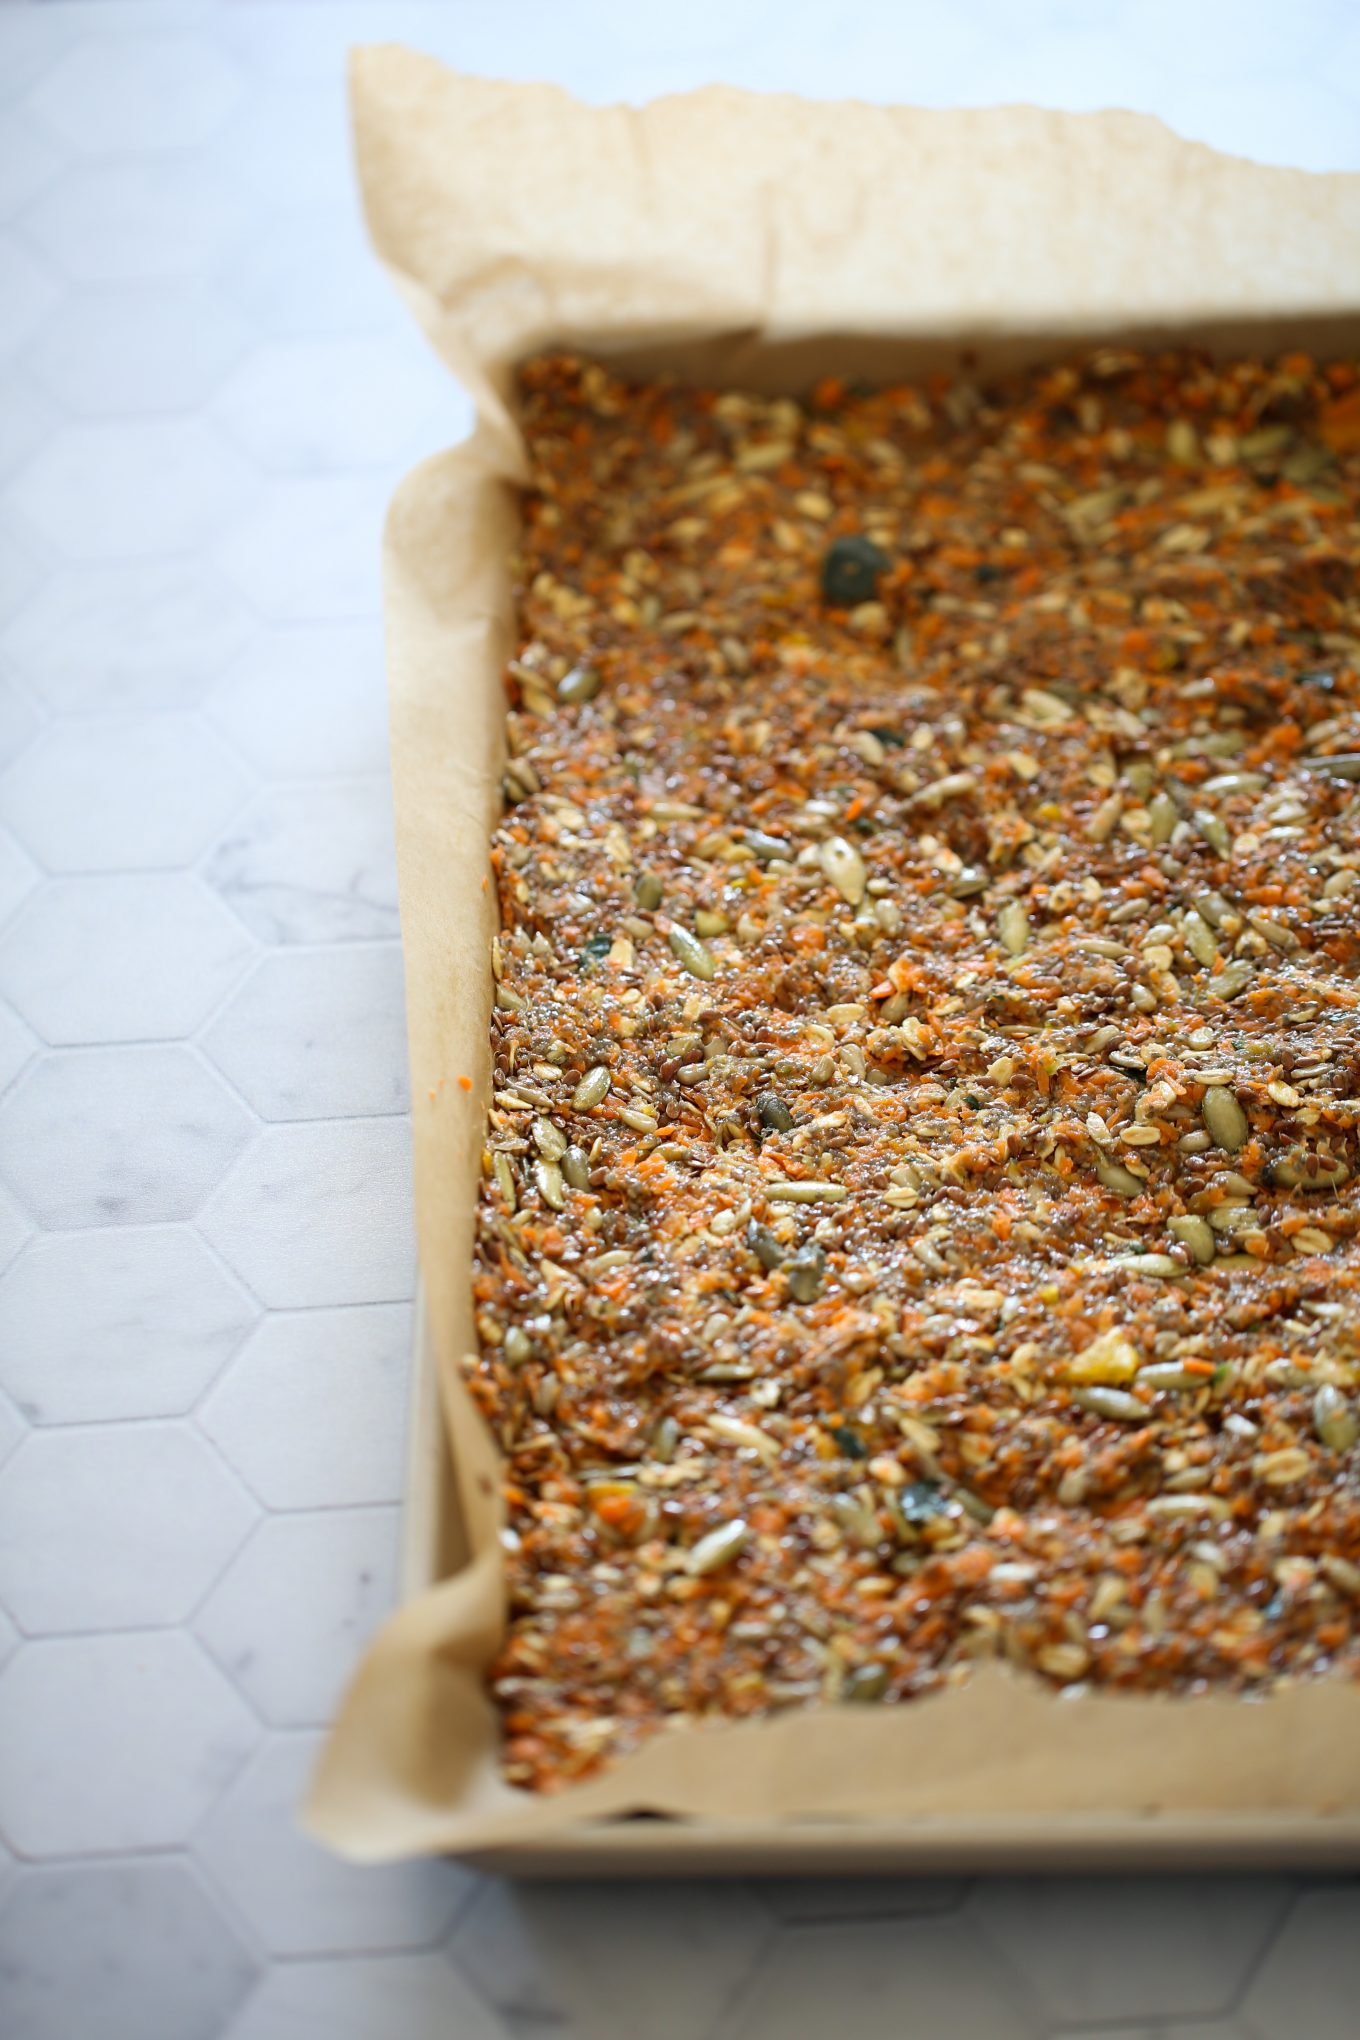 carrot juice crackers on a baking sheet before putting them in the oven